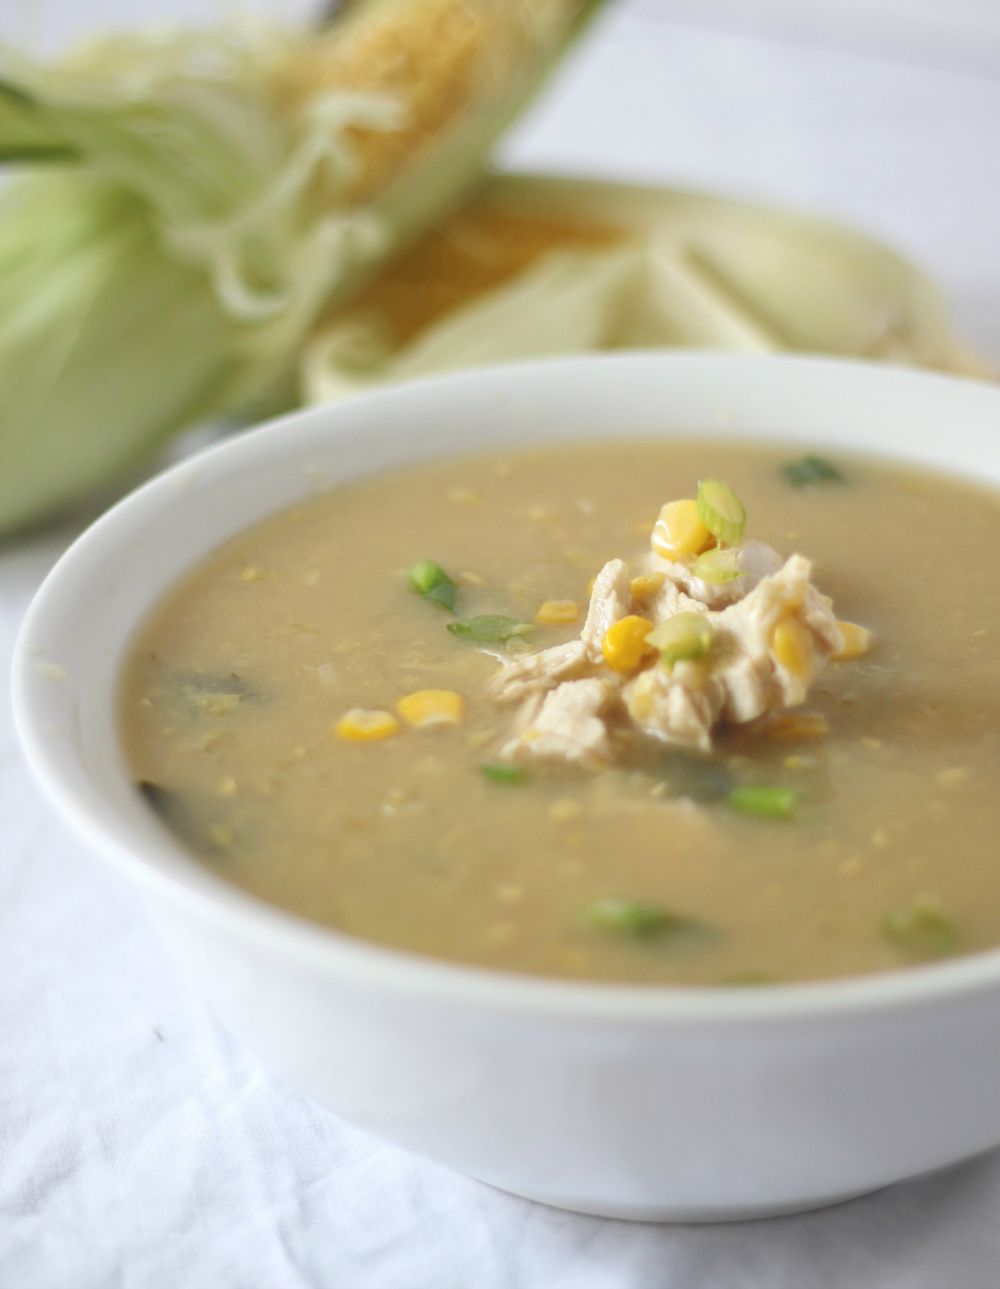 Chicken & Sweetcorn Soup jwill be on your table quicker than you can order a serve from your local takeaway.